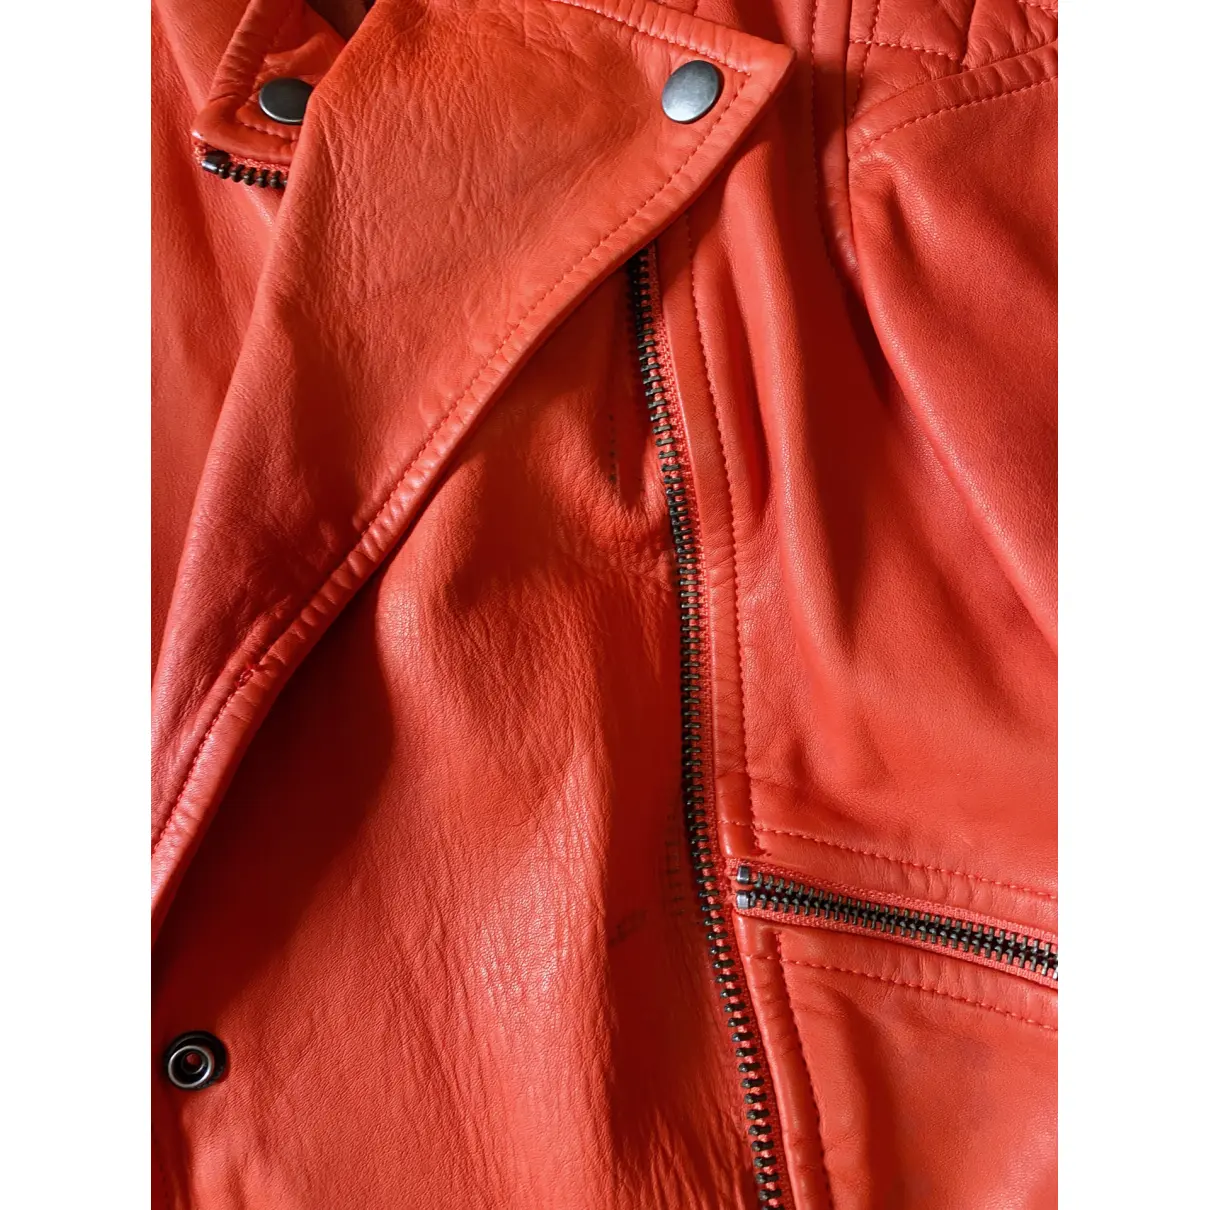 Leather jacket Marc by Marc Jacobs